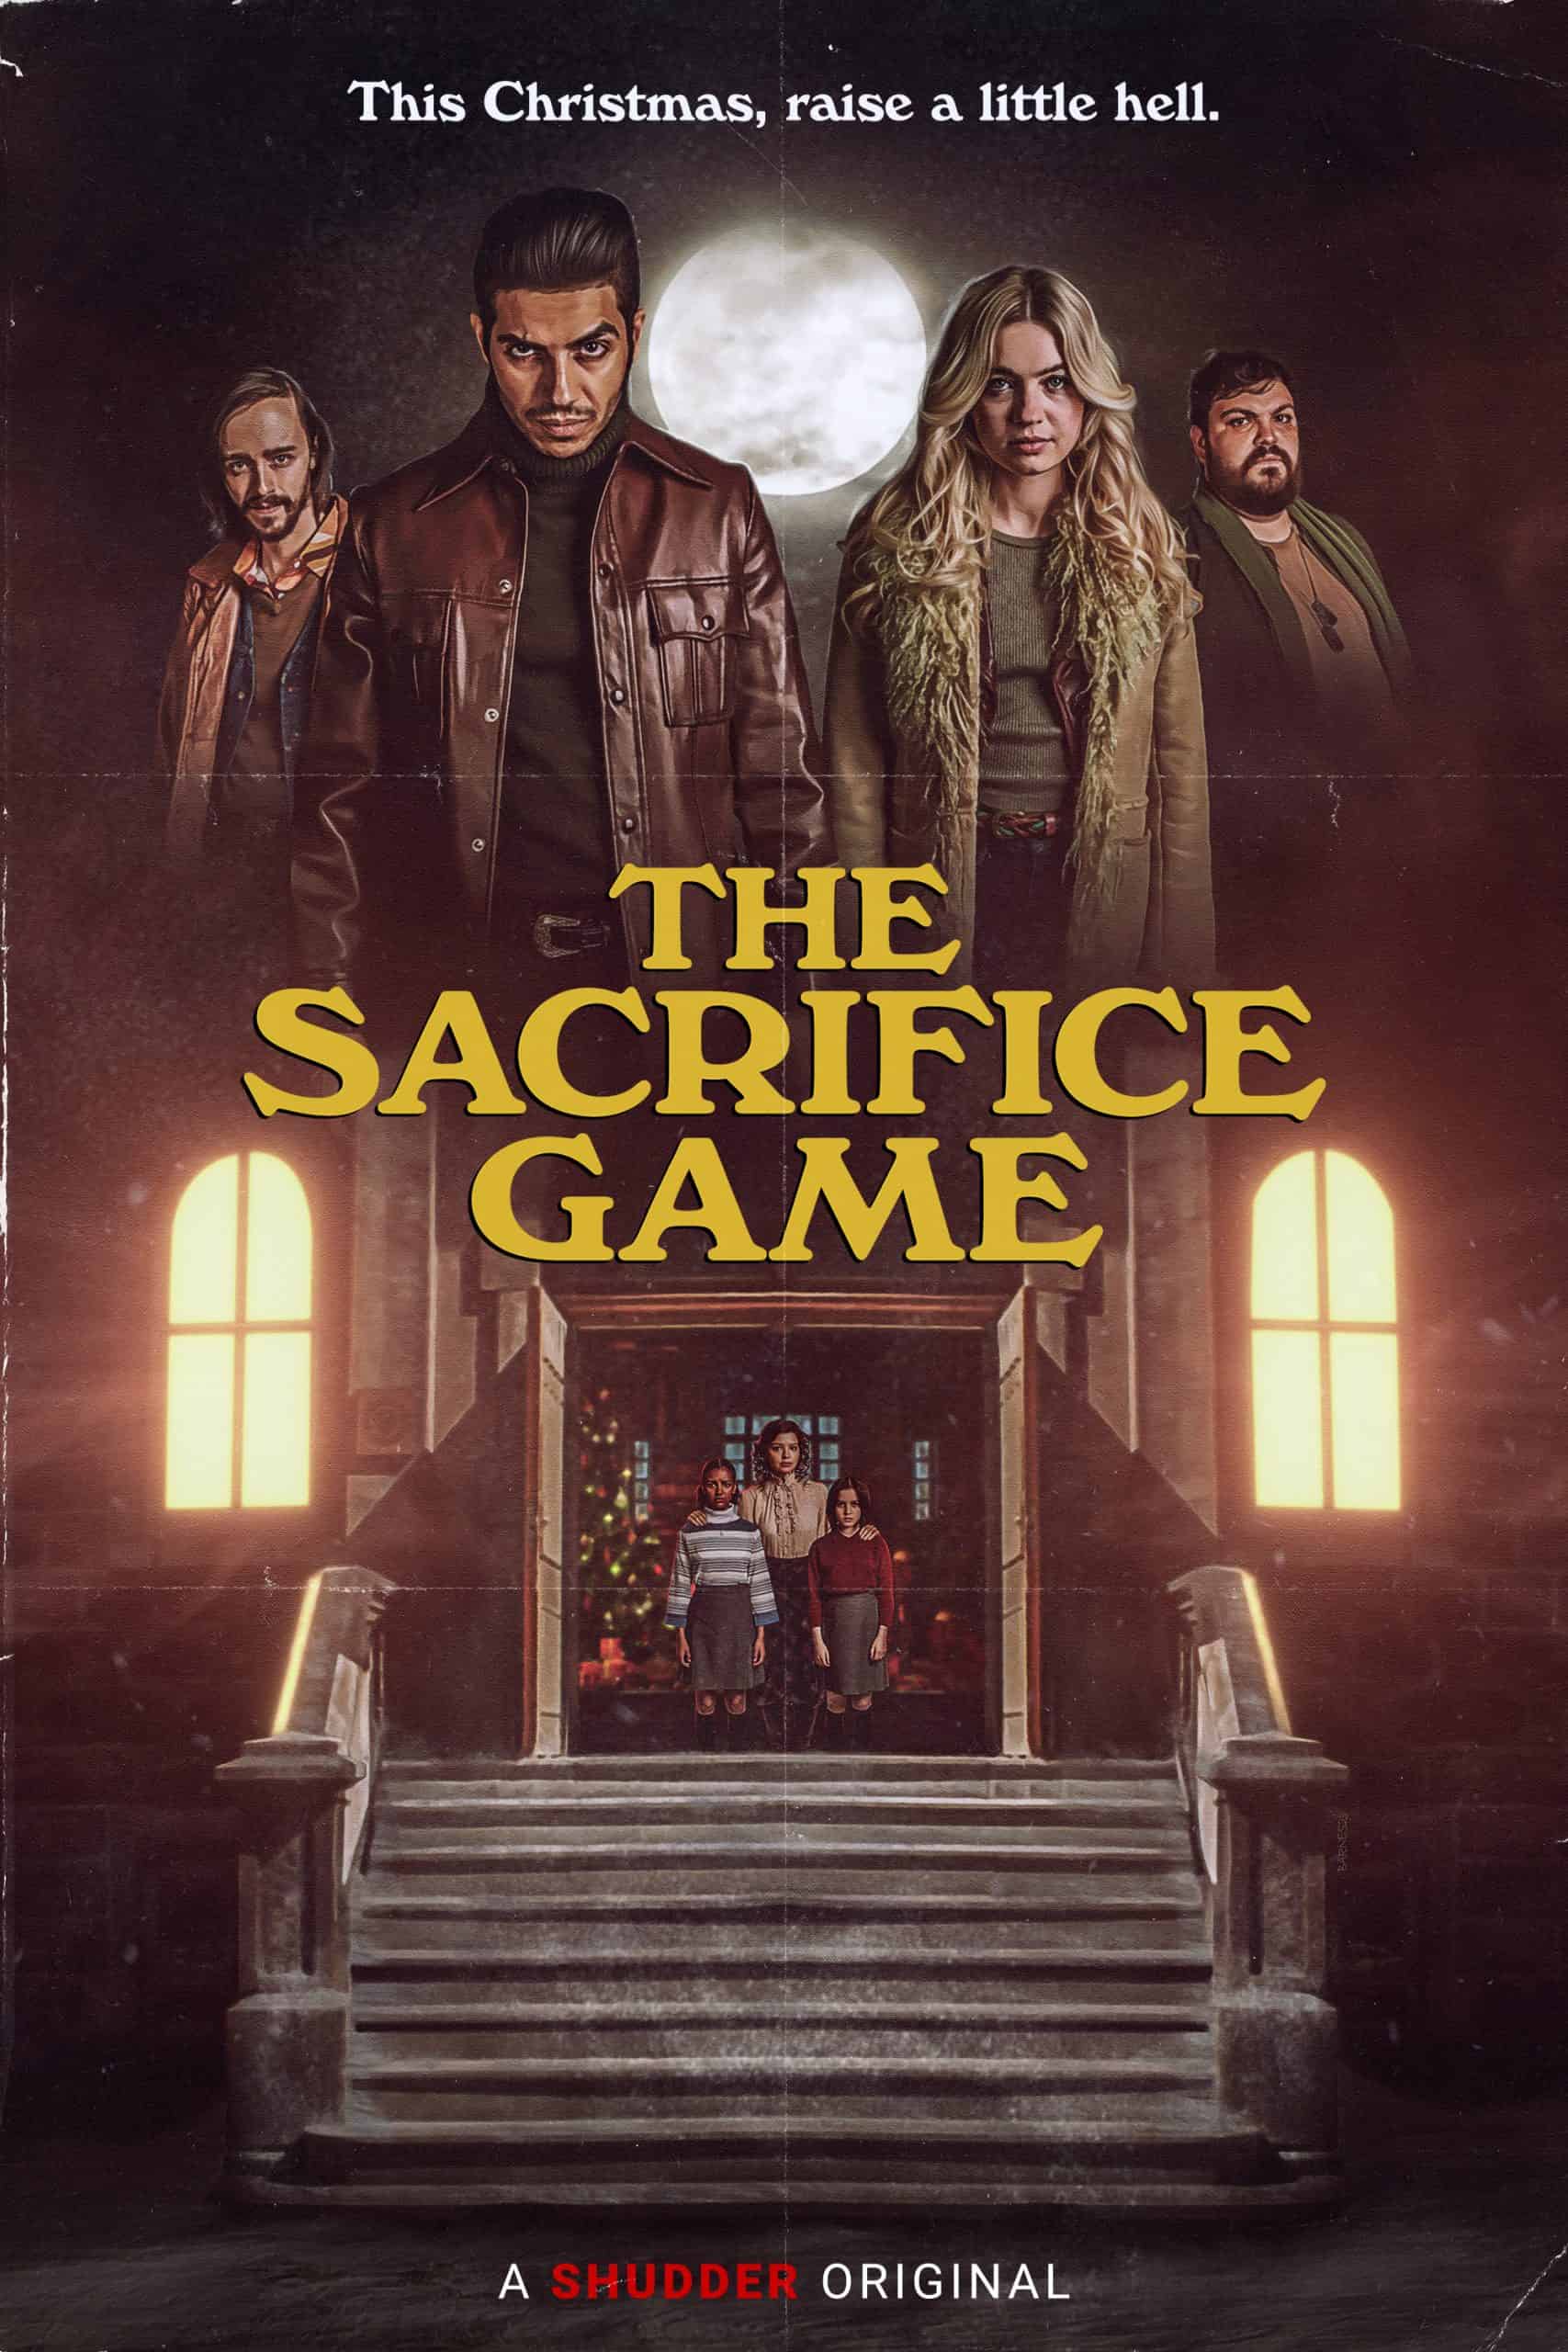 The Sacrifice Game: A Chilling Holiday Thriller Streaming on Shudder 70